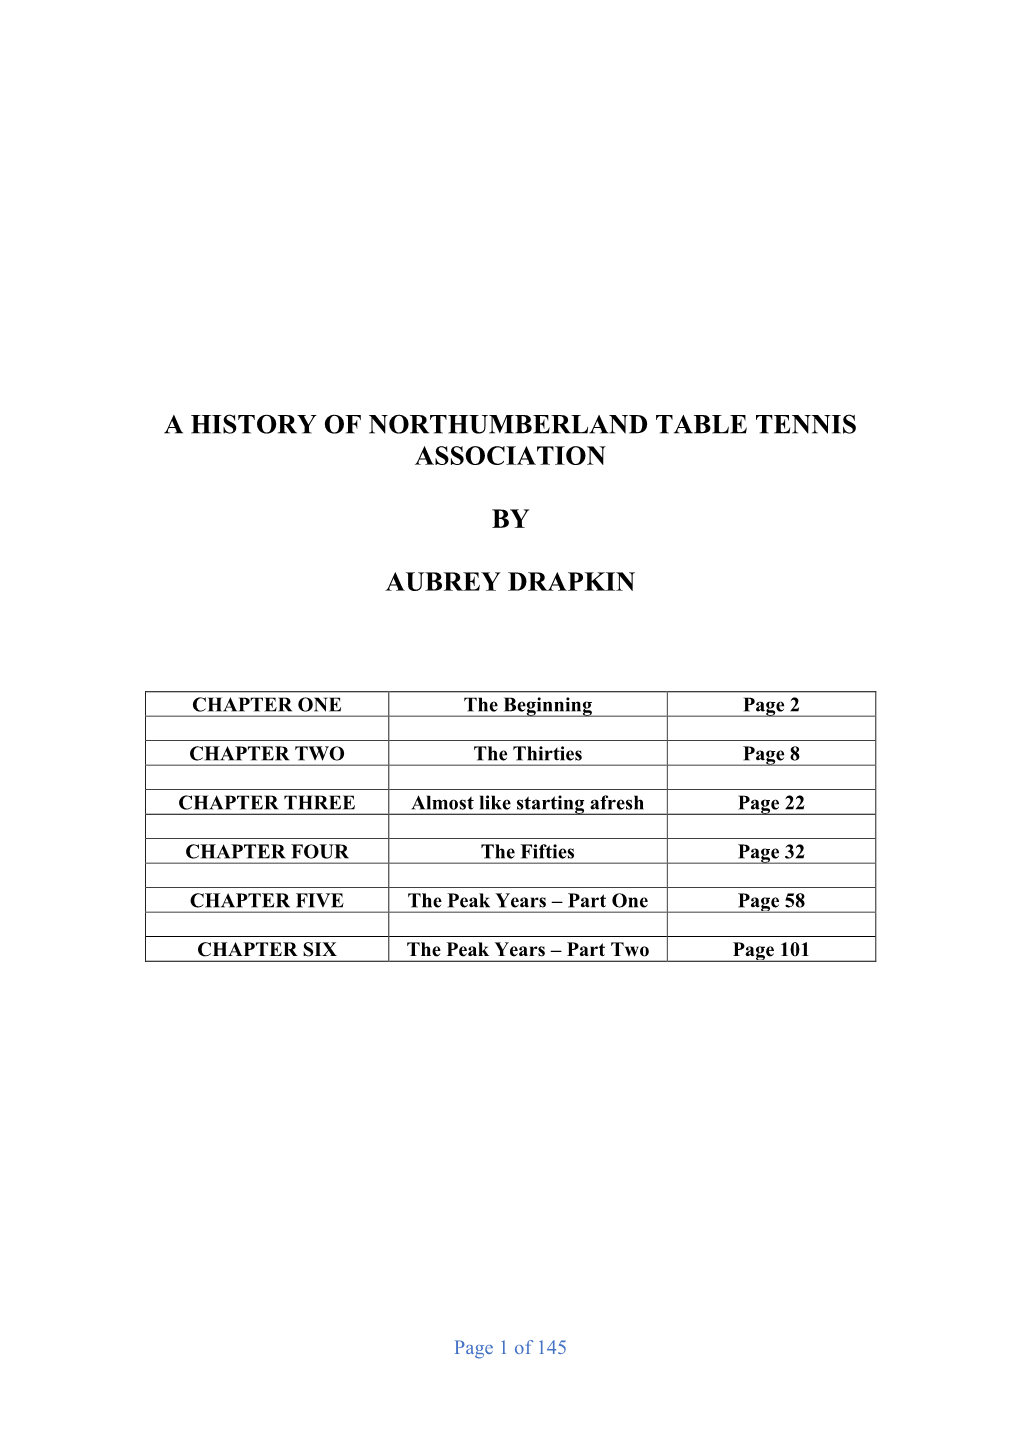 A History of Northumberland Table Tennis Association Chapters 1 to 6